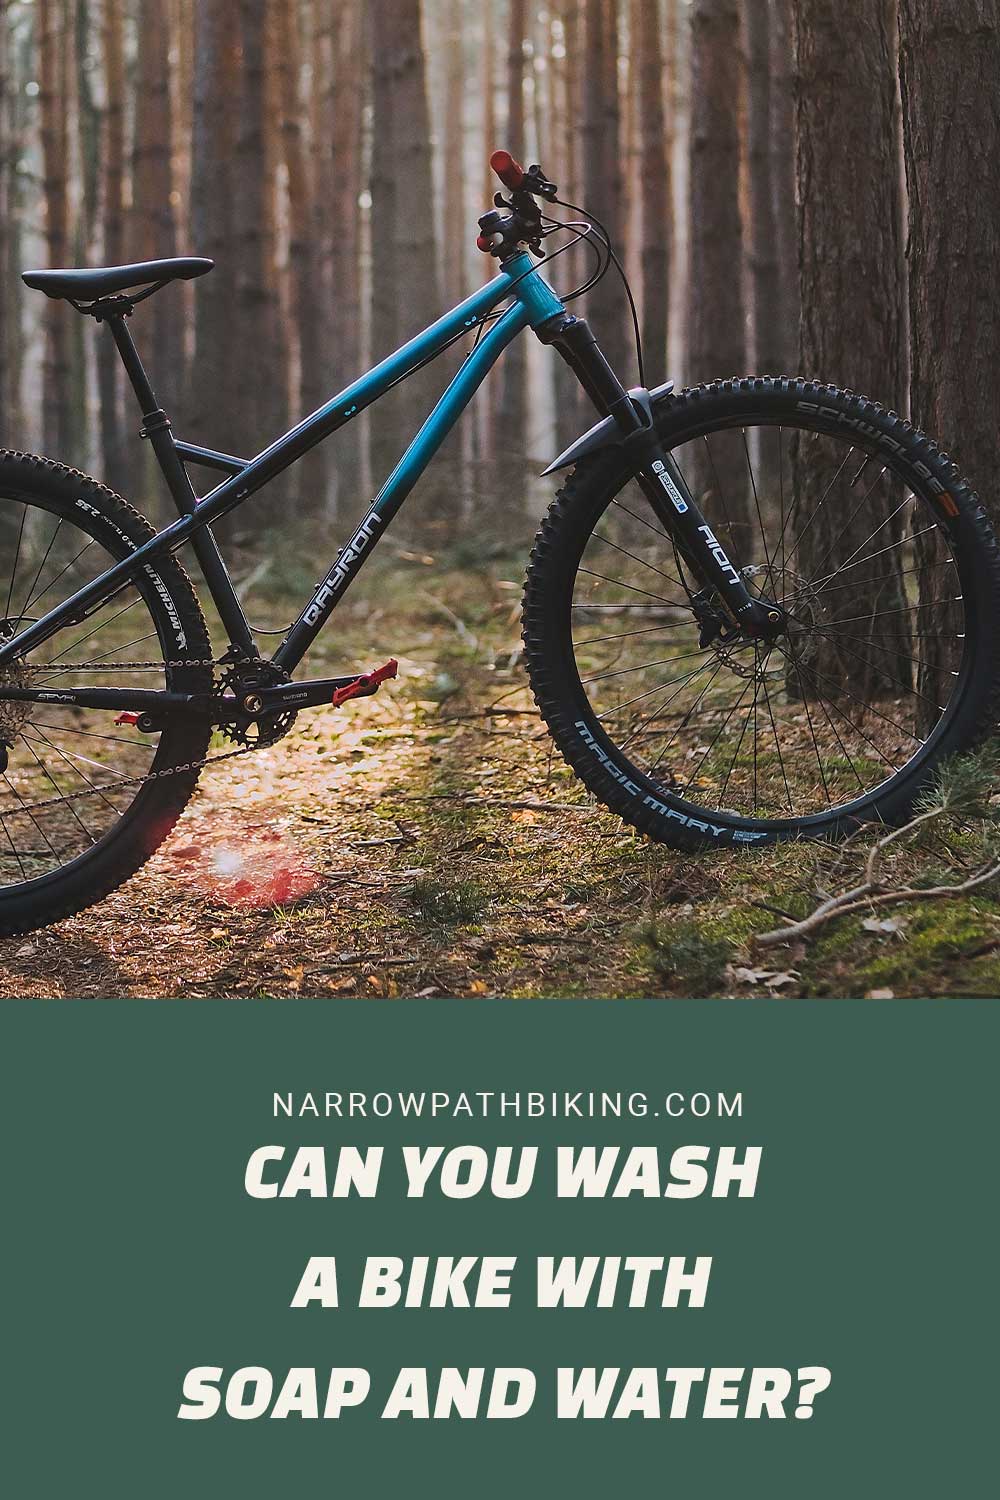 Can You Wash a Bike With Soap and Water?